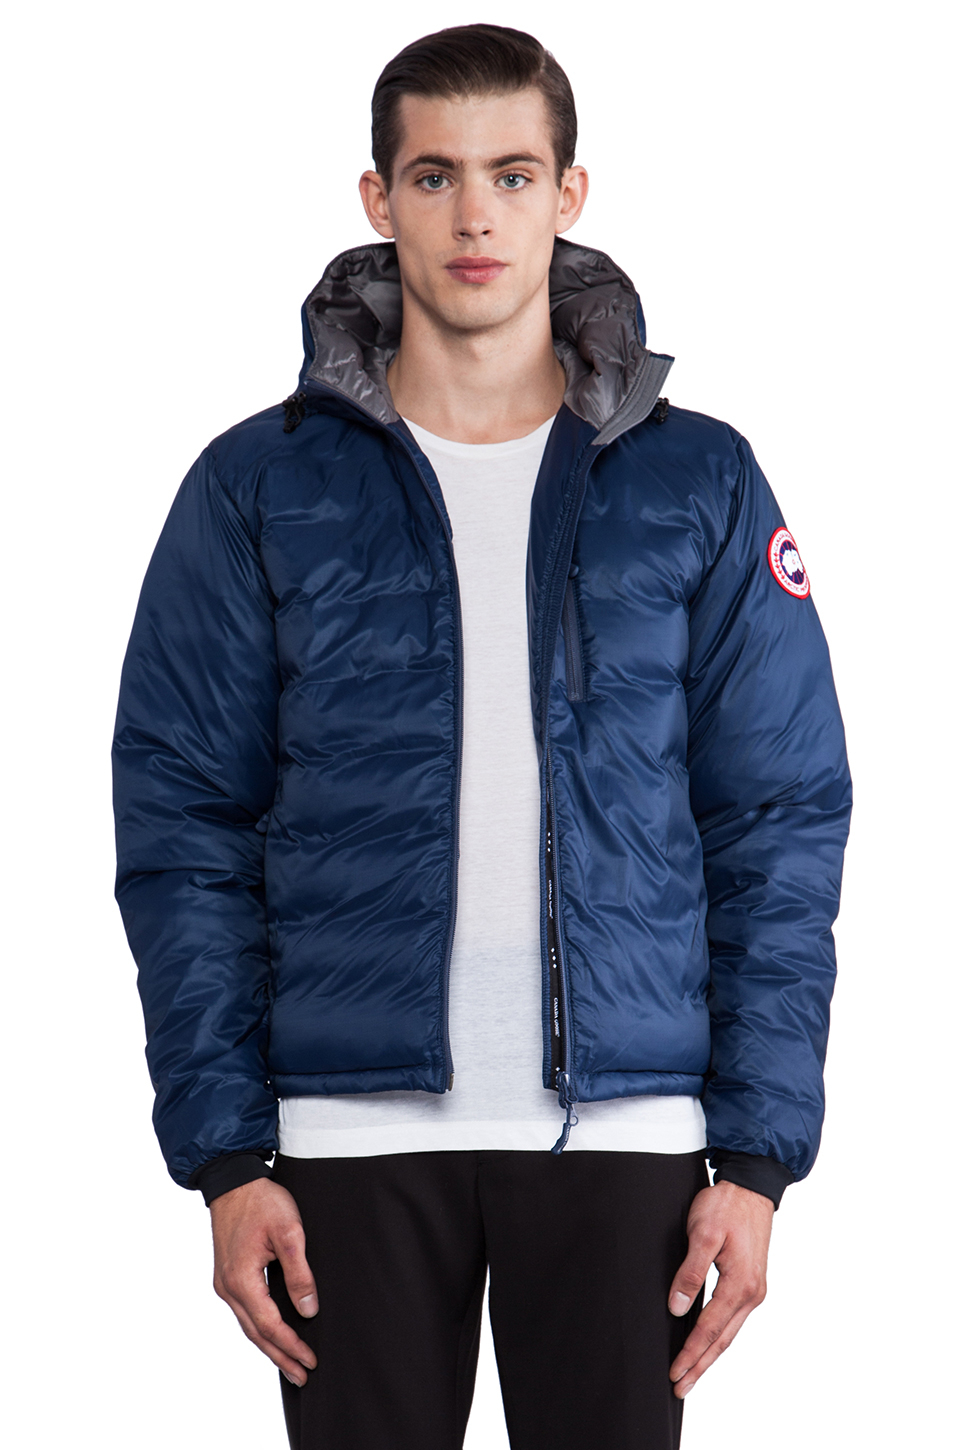 Canada Goose Synthetic Lodge Hoody in Blue for Men - Lyst